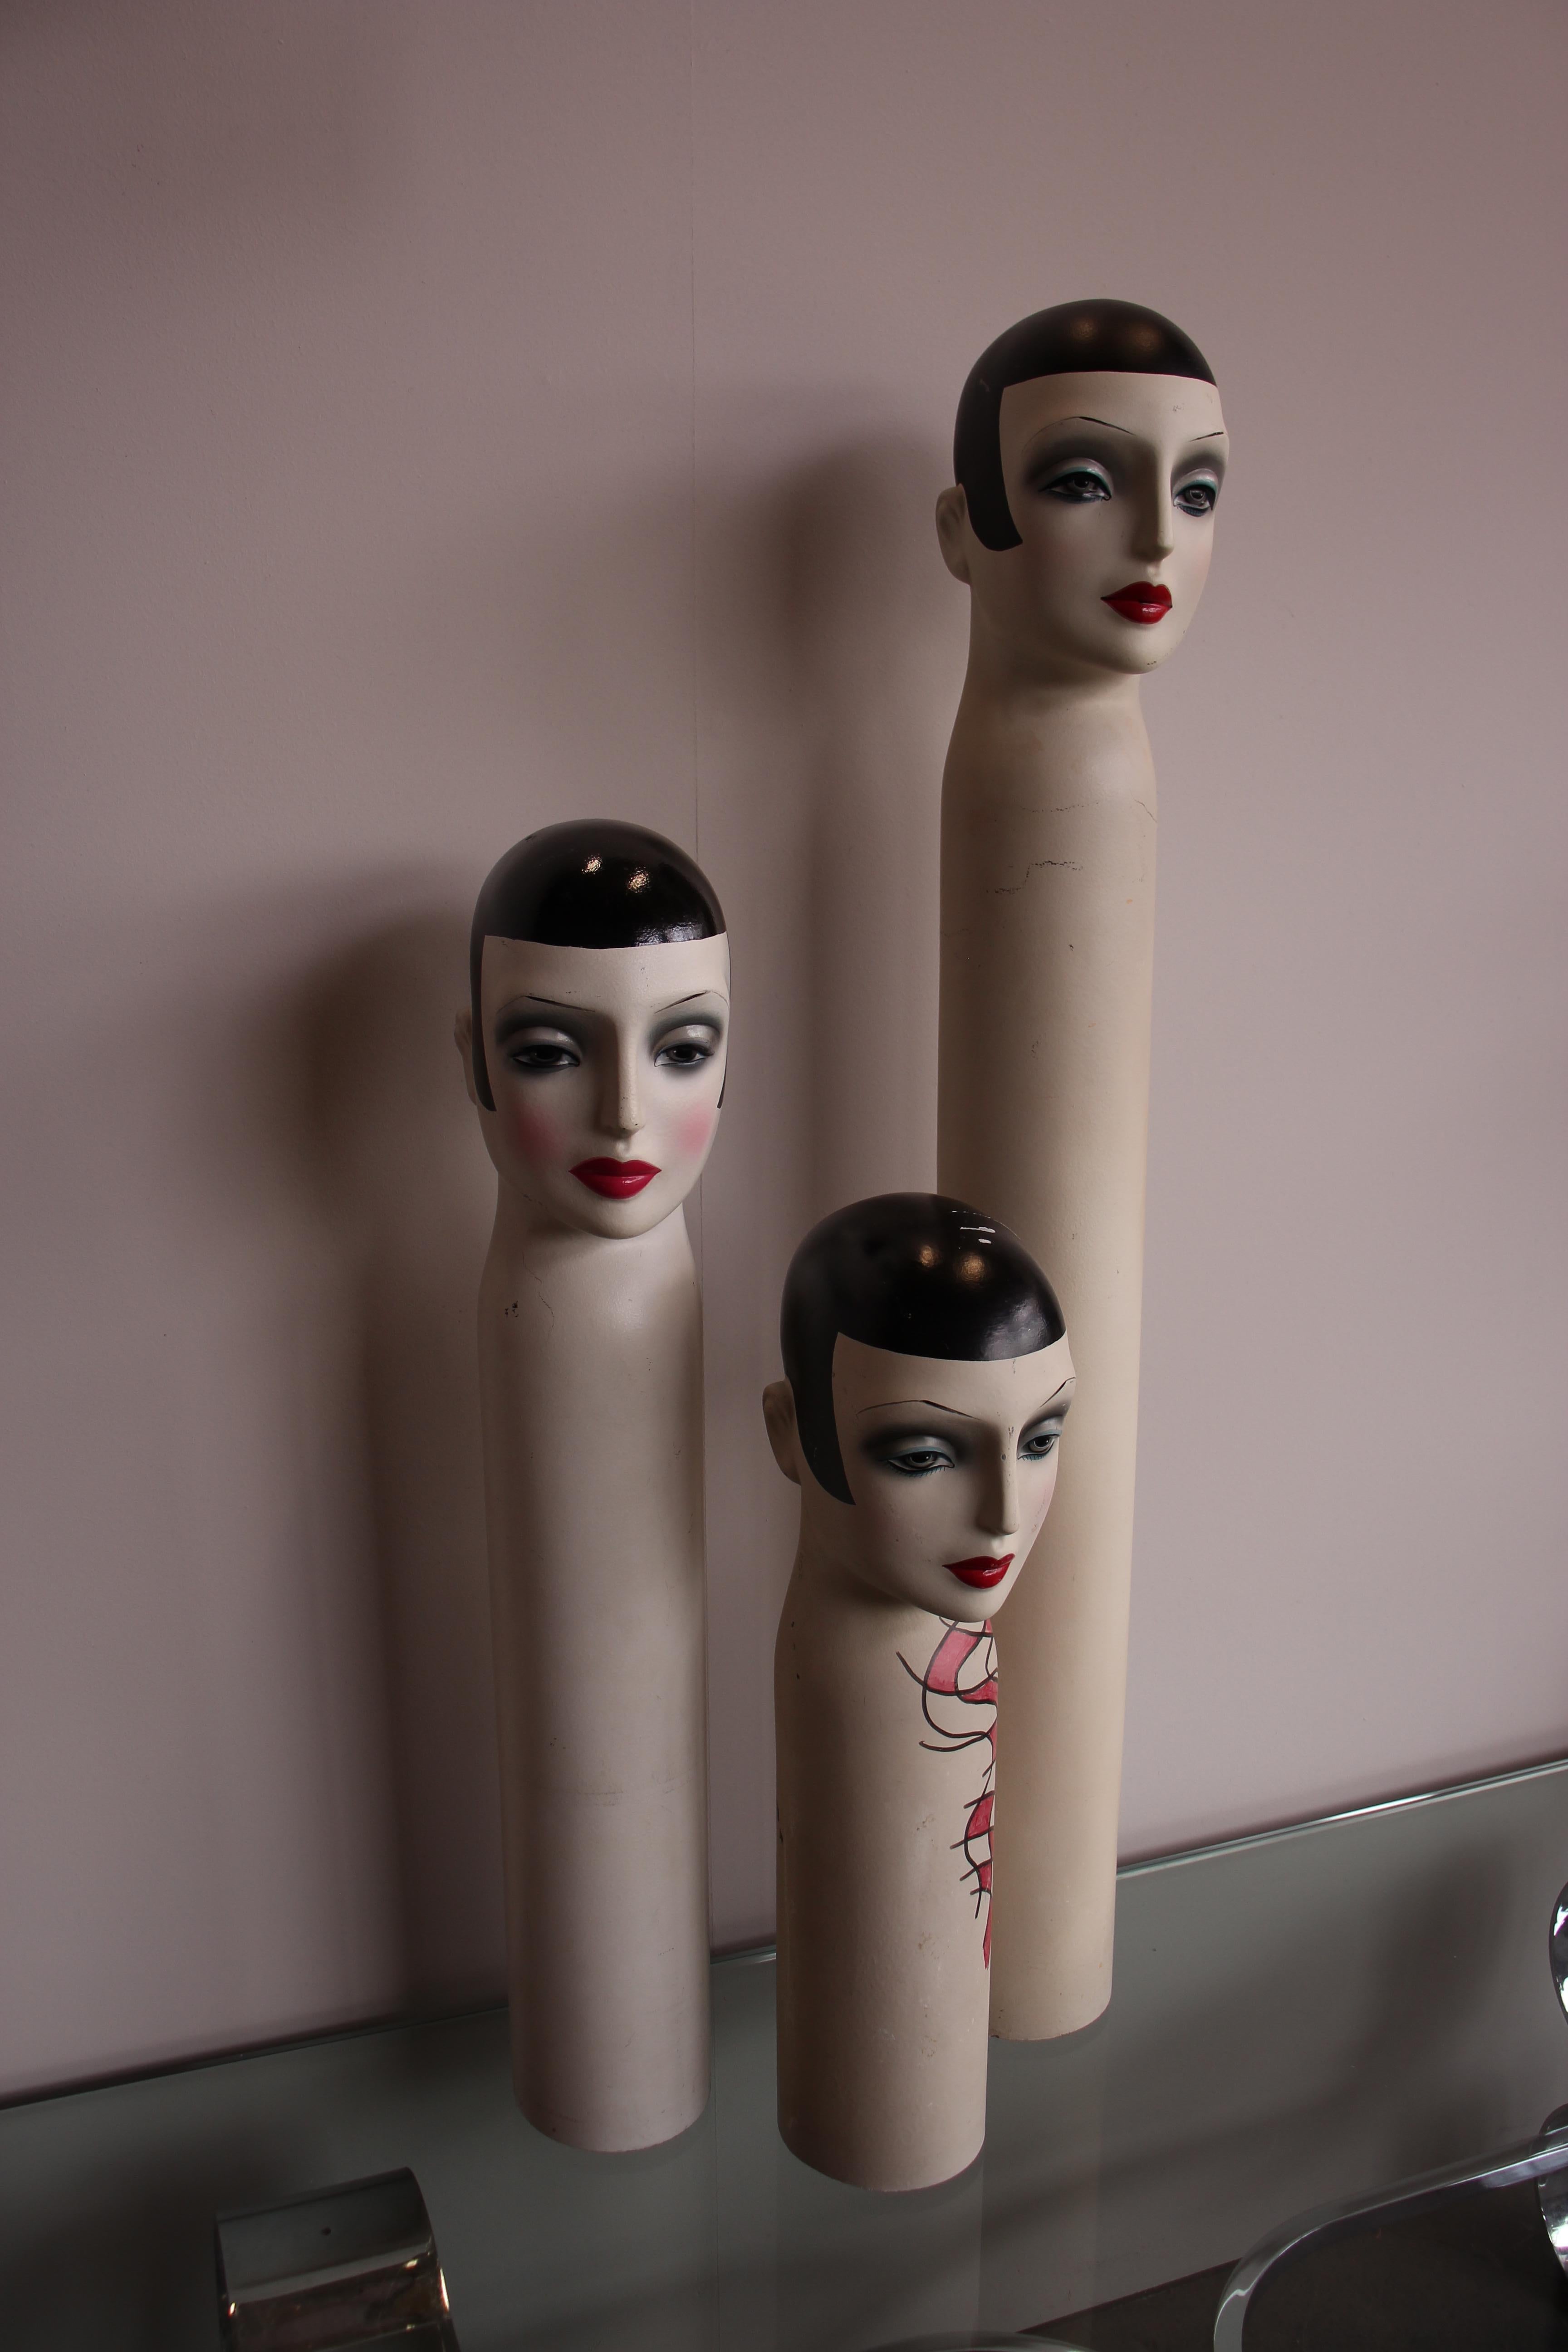 Plastic Advertising Figures, Mannequins for Hats and Scarves from the 1950s